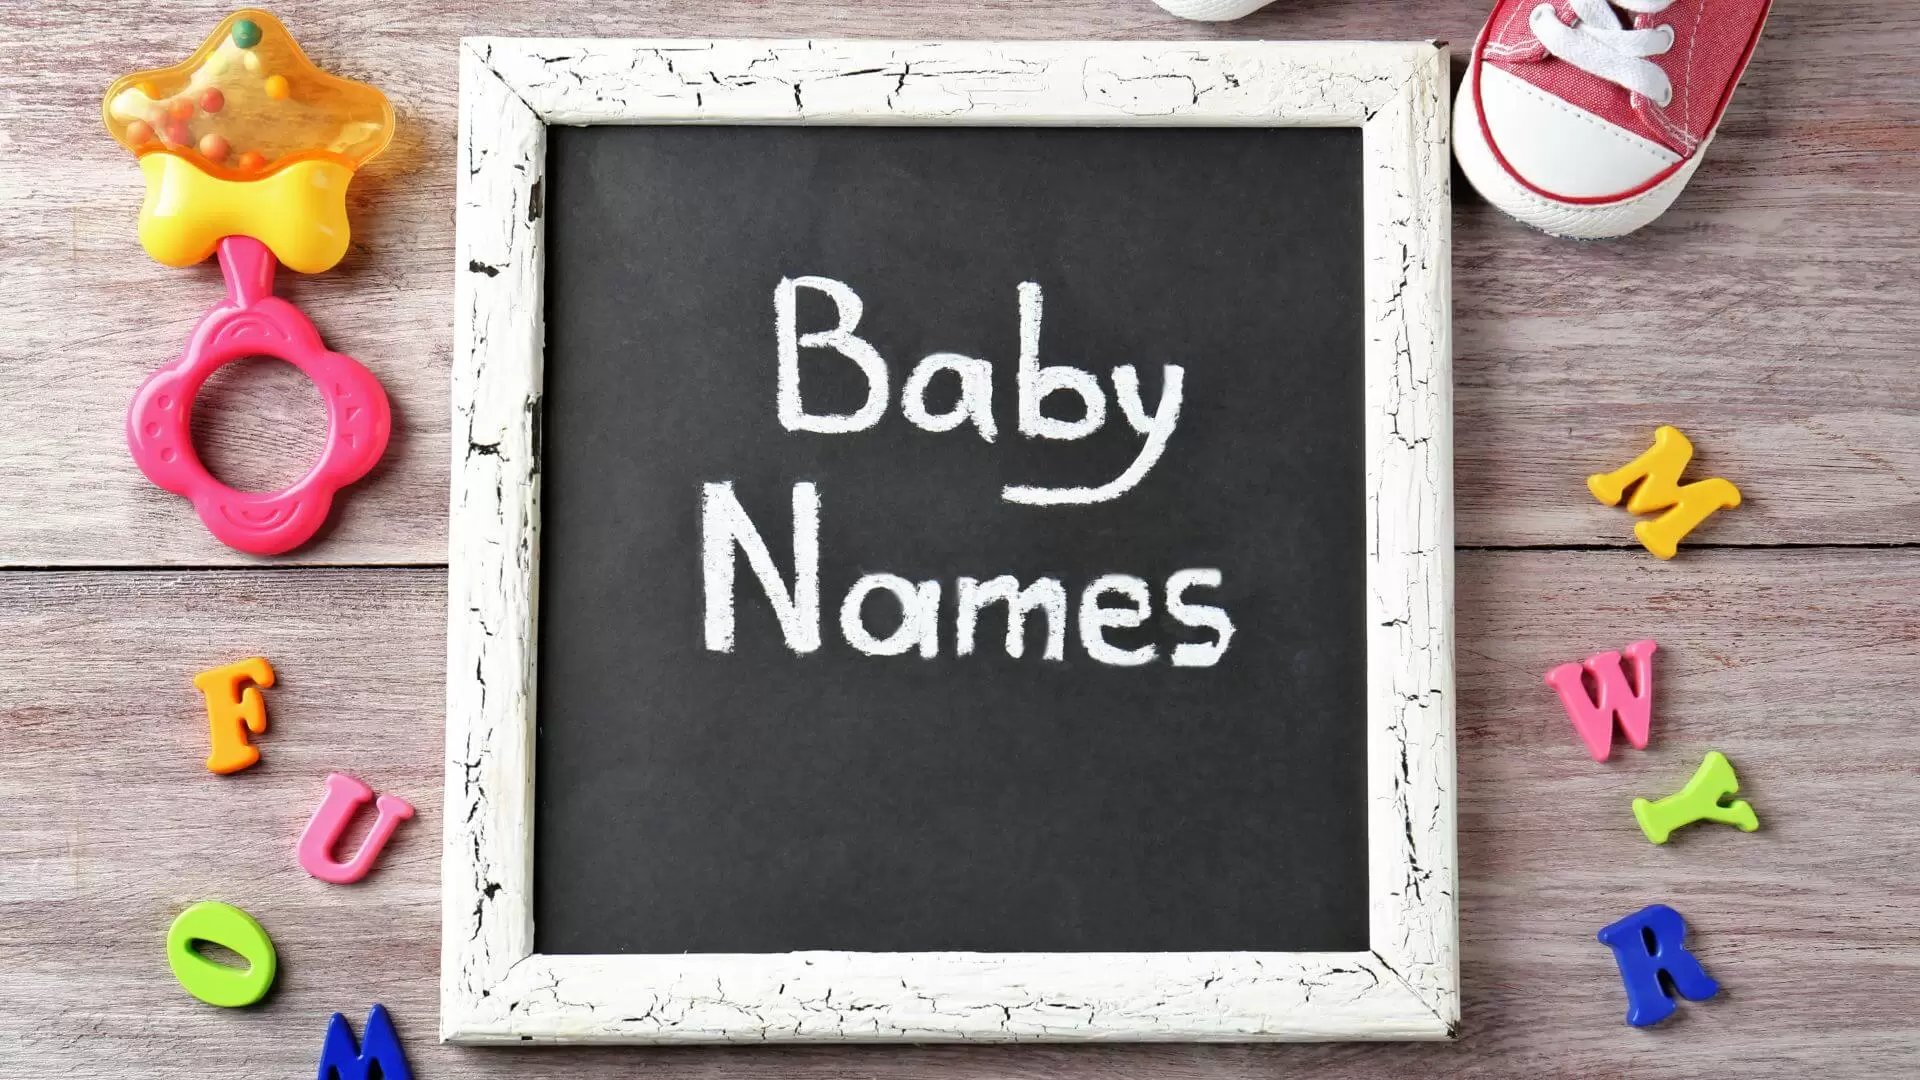 HOW TO CHOOSE A NAME FOR A CHILD (1)